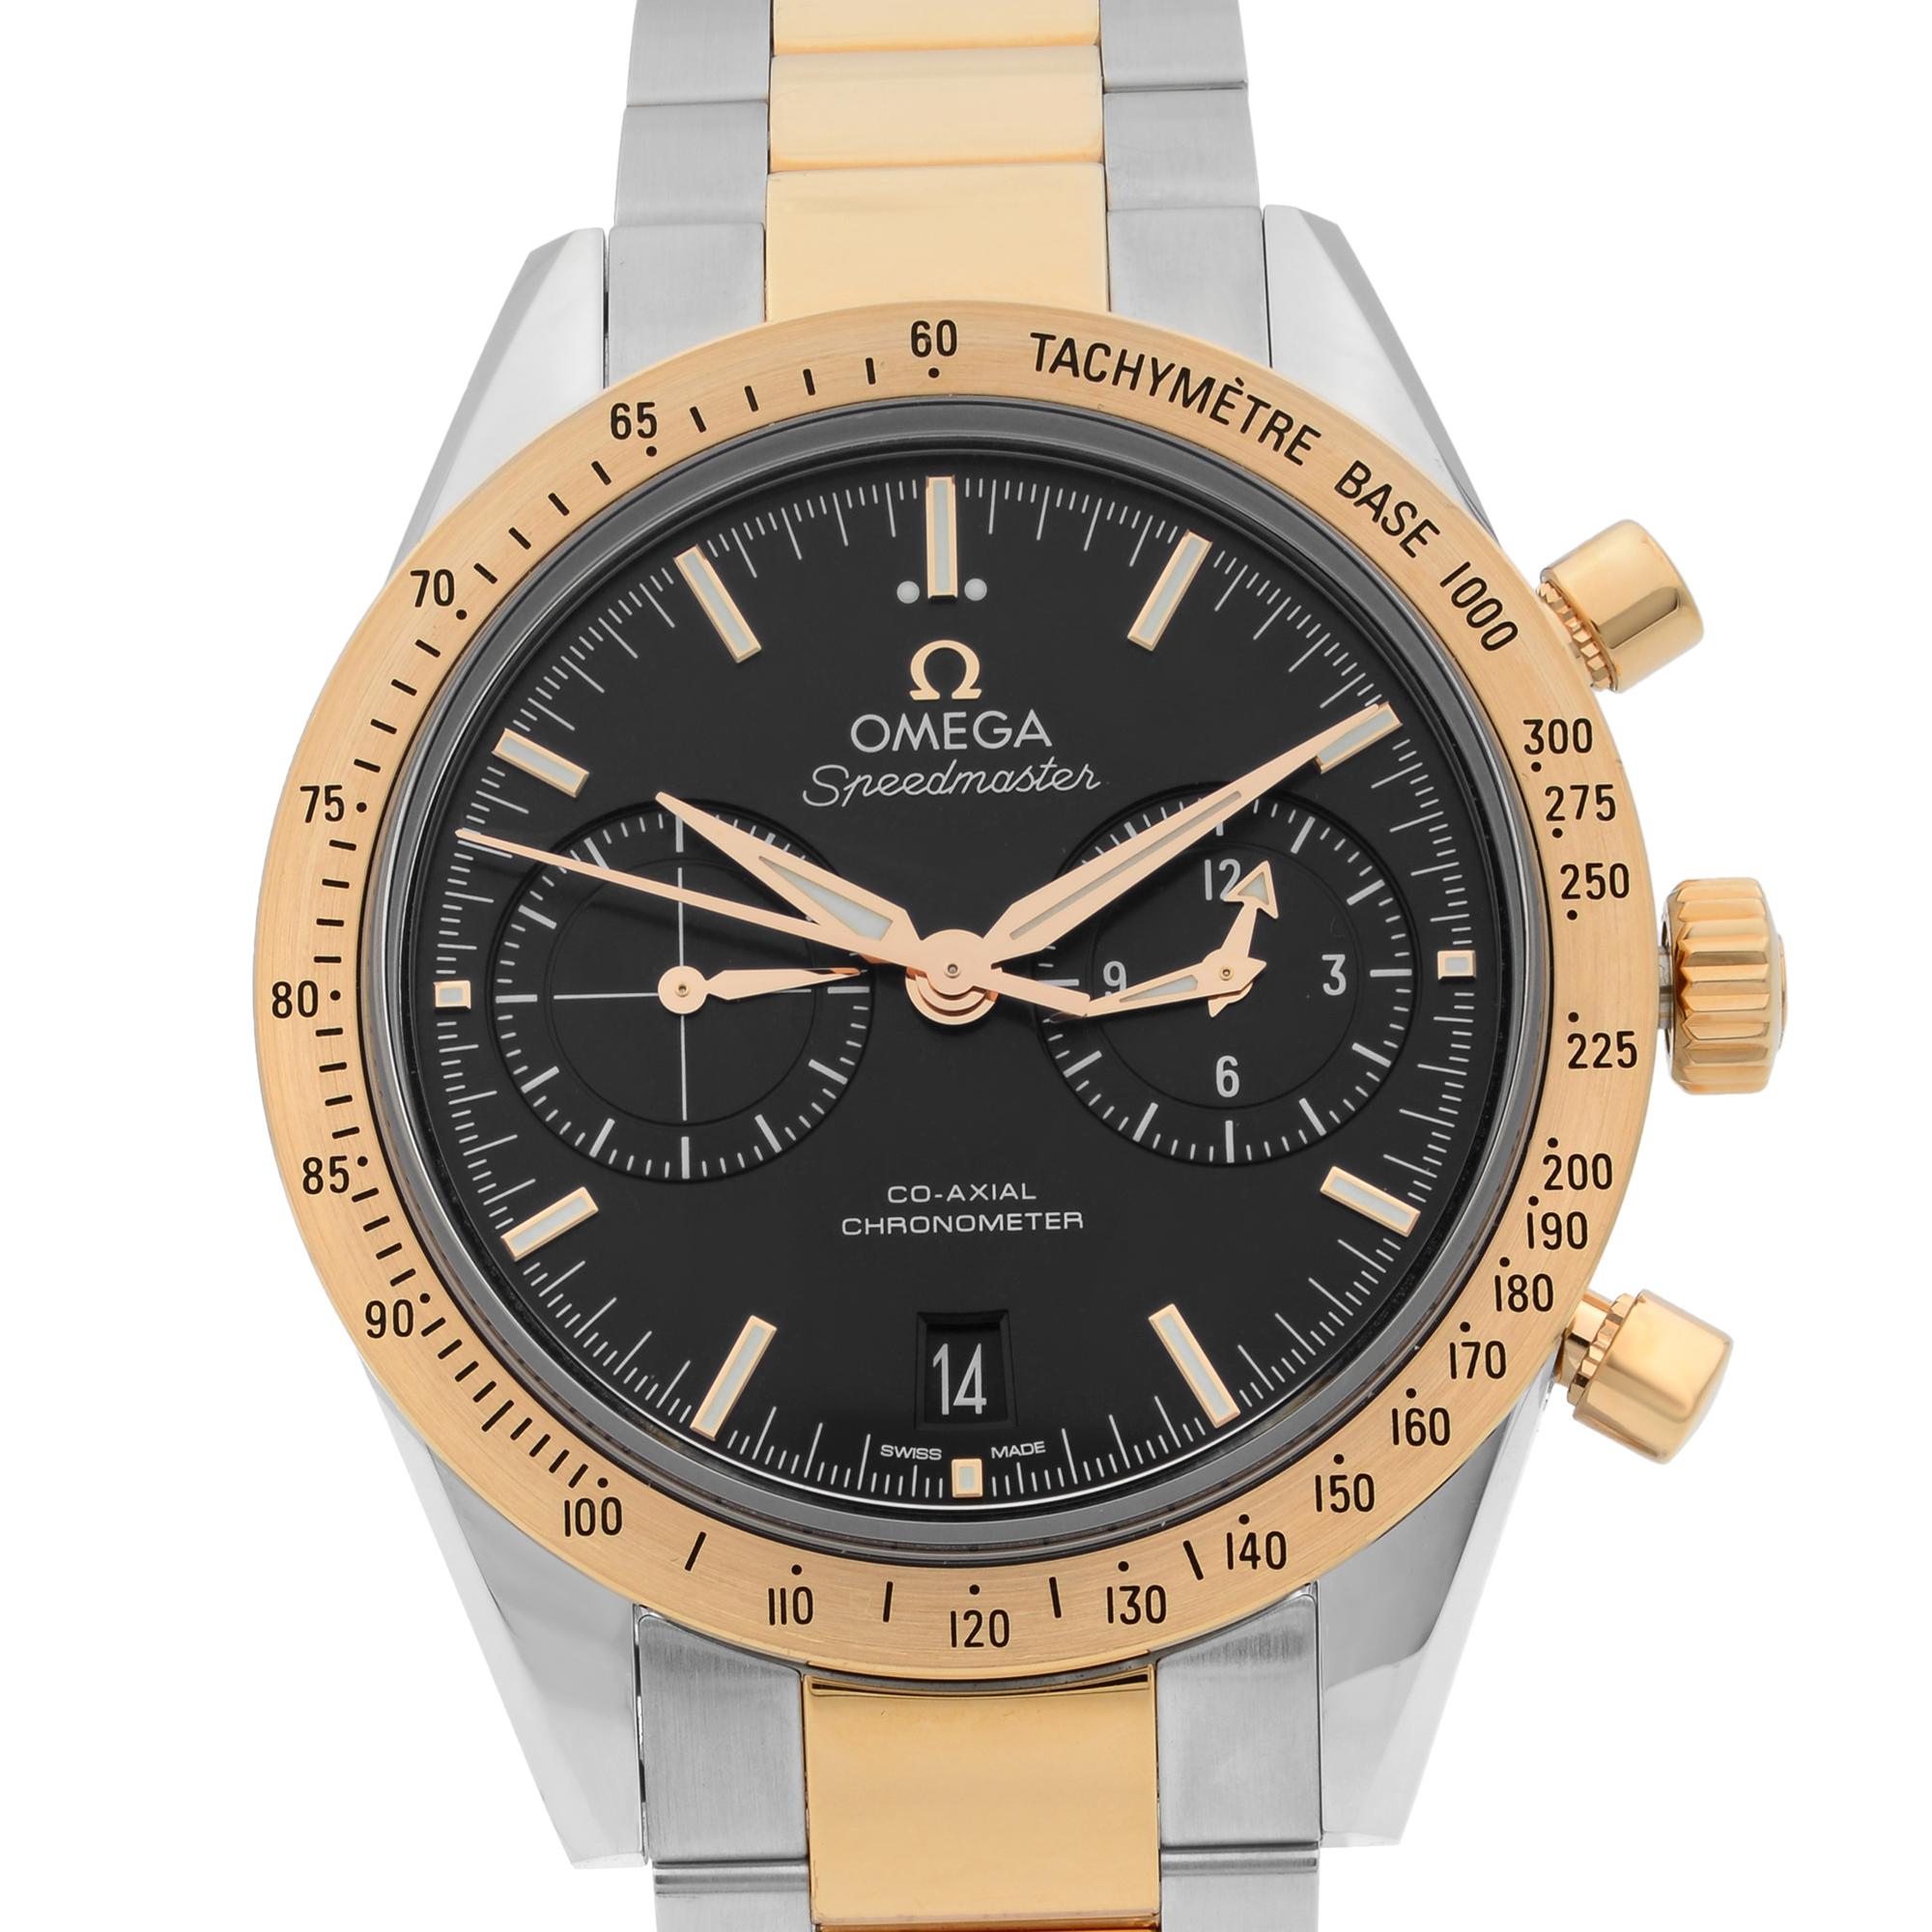 This display model Omega Speedmaster  331.20.42.51.01.002  is a beautiful men's timepiece that is powered by mechanical (automatic) movement which is cased in a stainless steel case. It has a round shape face, chronograph, date indicator, small